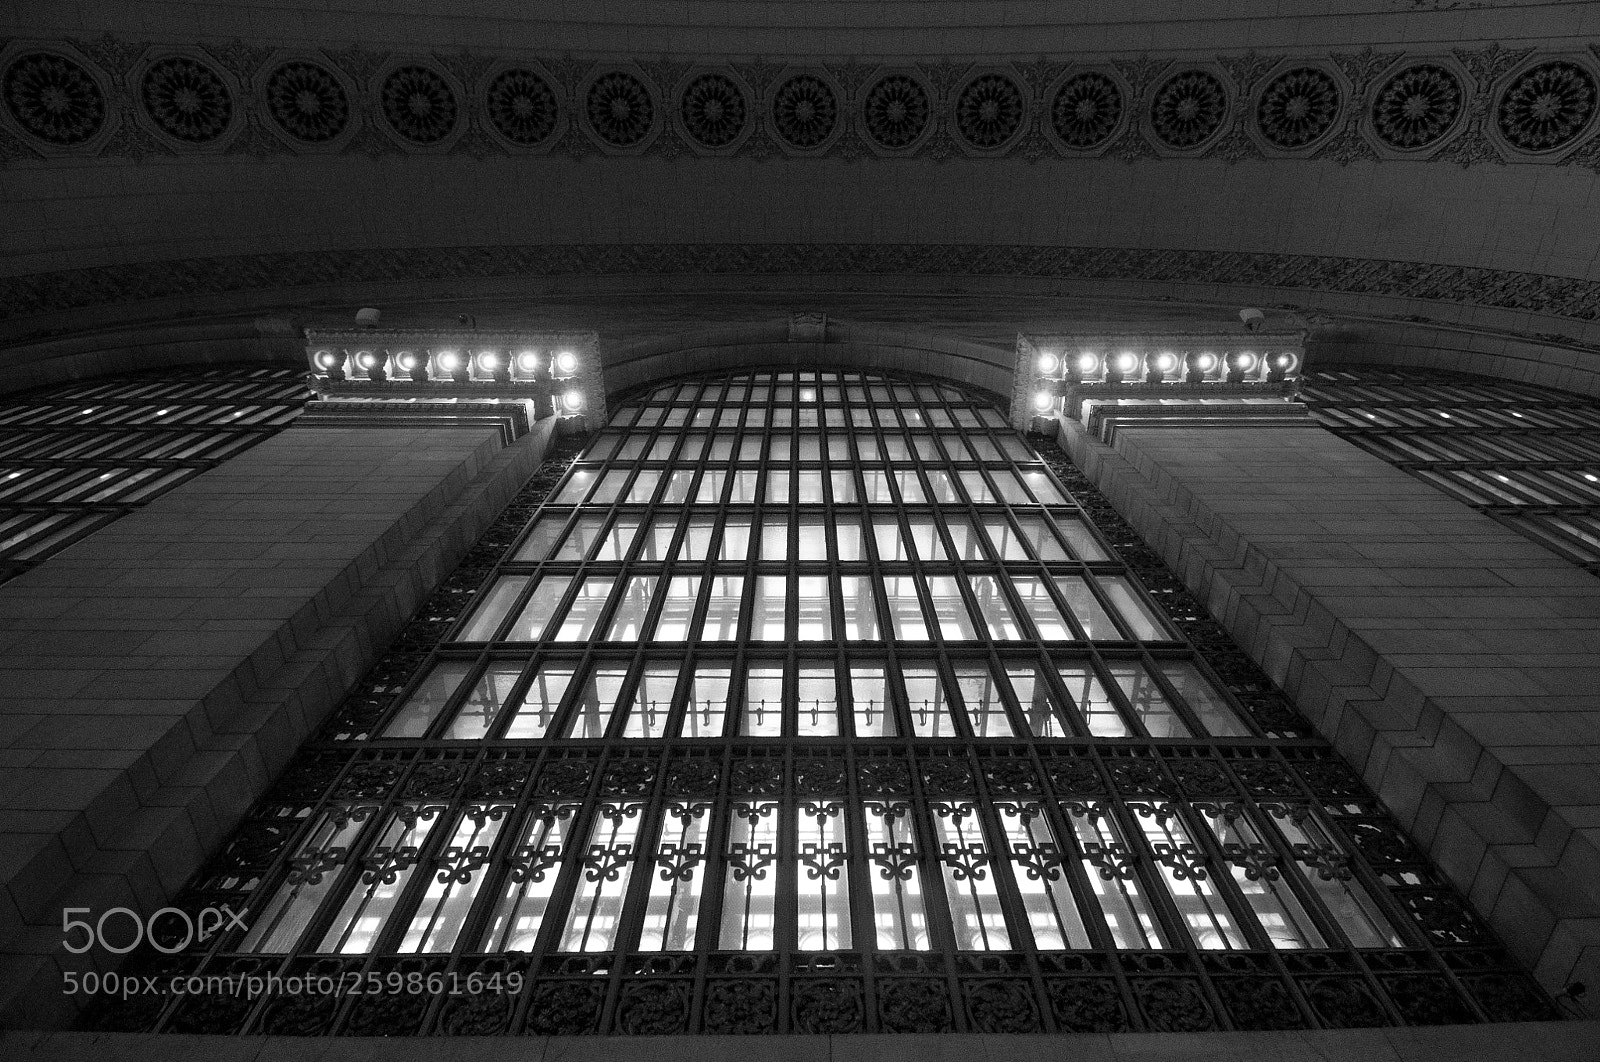 Nikon D90 sample photo. Grand central station window photography